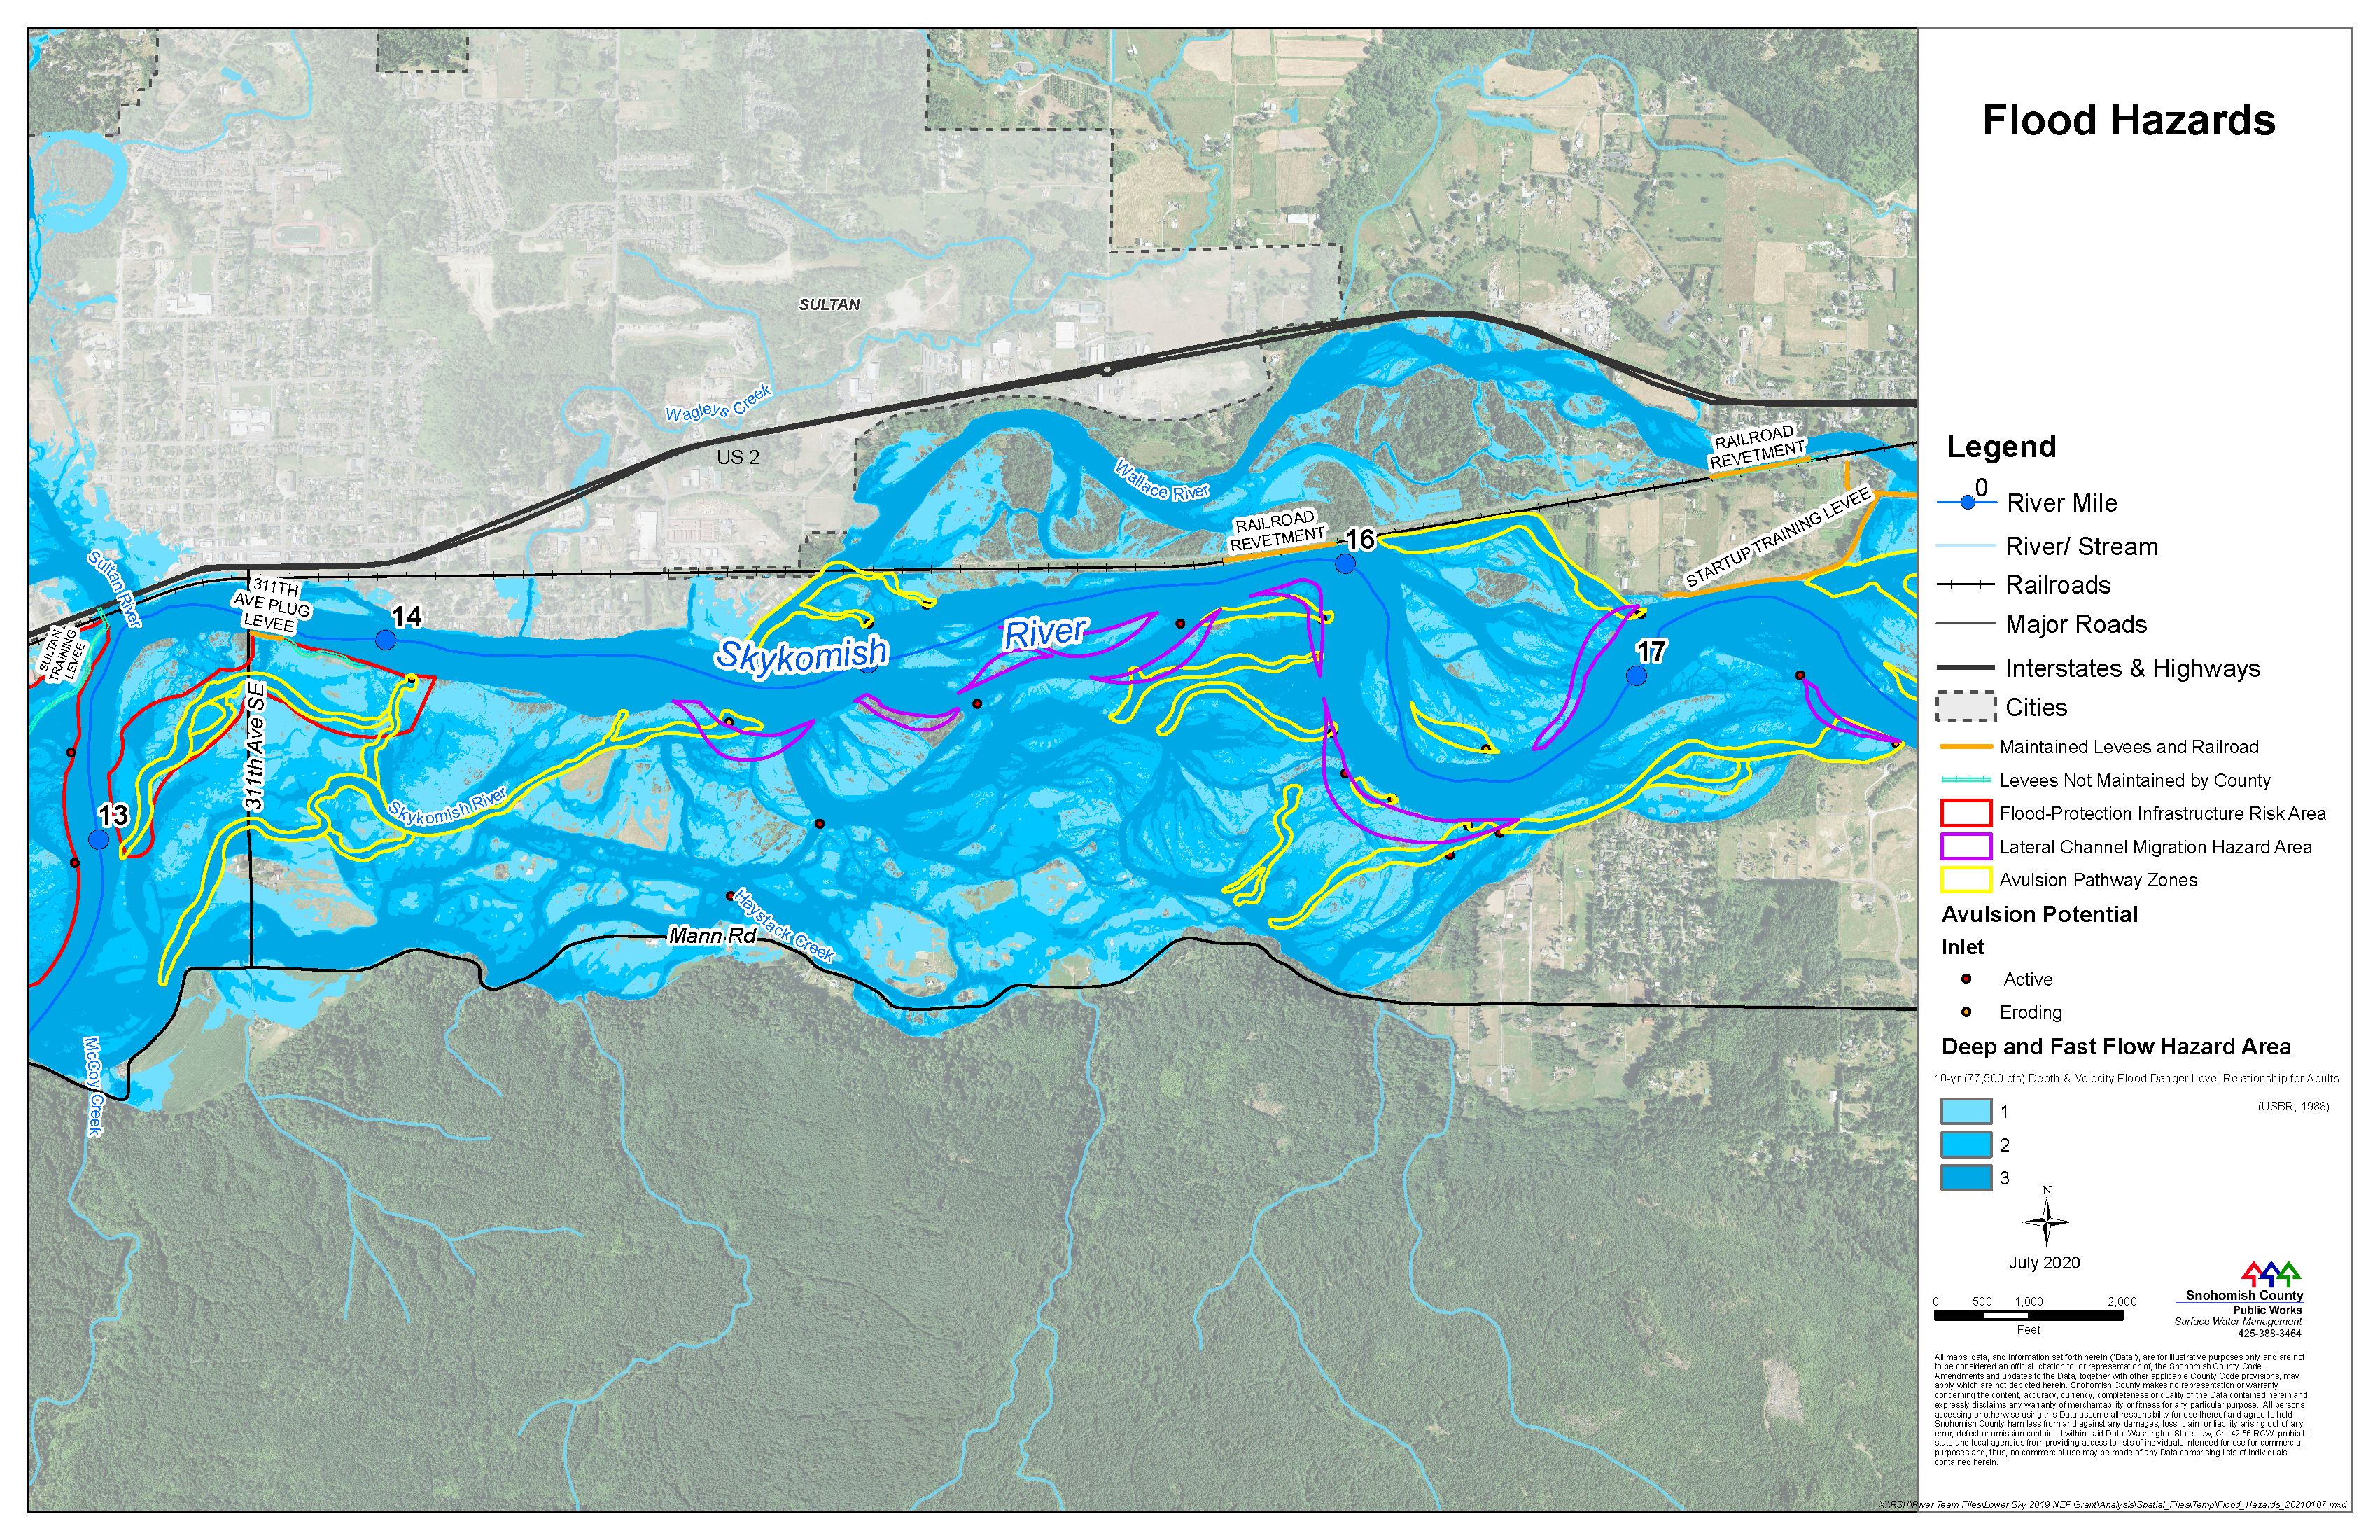 Map of Flood Hazards along skykomish River. There are legends for River Mile, River/Stream, Railroads, major roads, Interstates and highways. Boundaries with dotted black lines represent cities. Orange lines represent maintained levess and railroads. Light blue tracks represent levees not maintained by County. Red line boundary represents Flood protection infrastructure risk area. Purple line boundary represents lateral channel migration hazard area. Yellow line boundary represents avulsion pathway zones. Avulsion potential inlet is active or eroding. Deep and fast flow hazarad area is light medium or dark blue at levels 1 2 and 3 respectively.